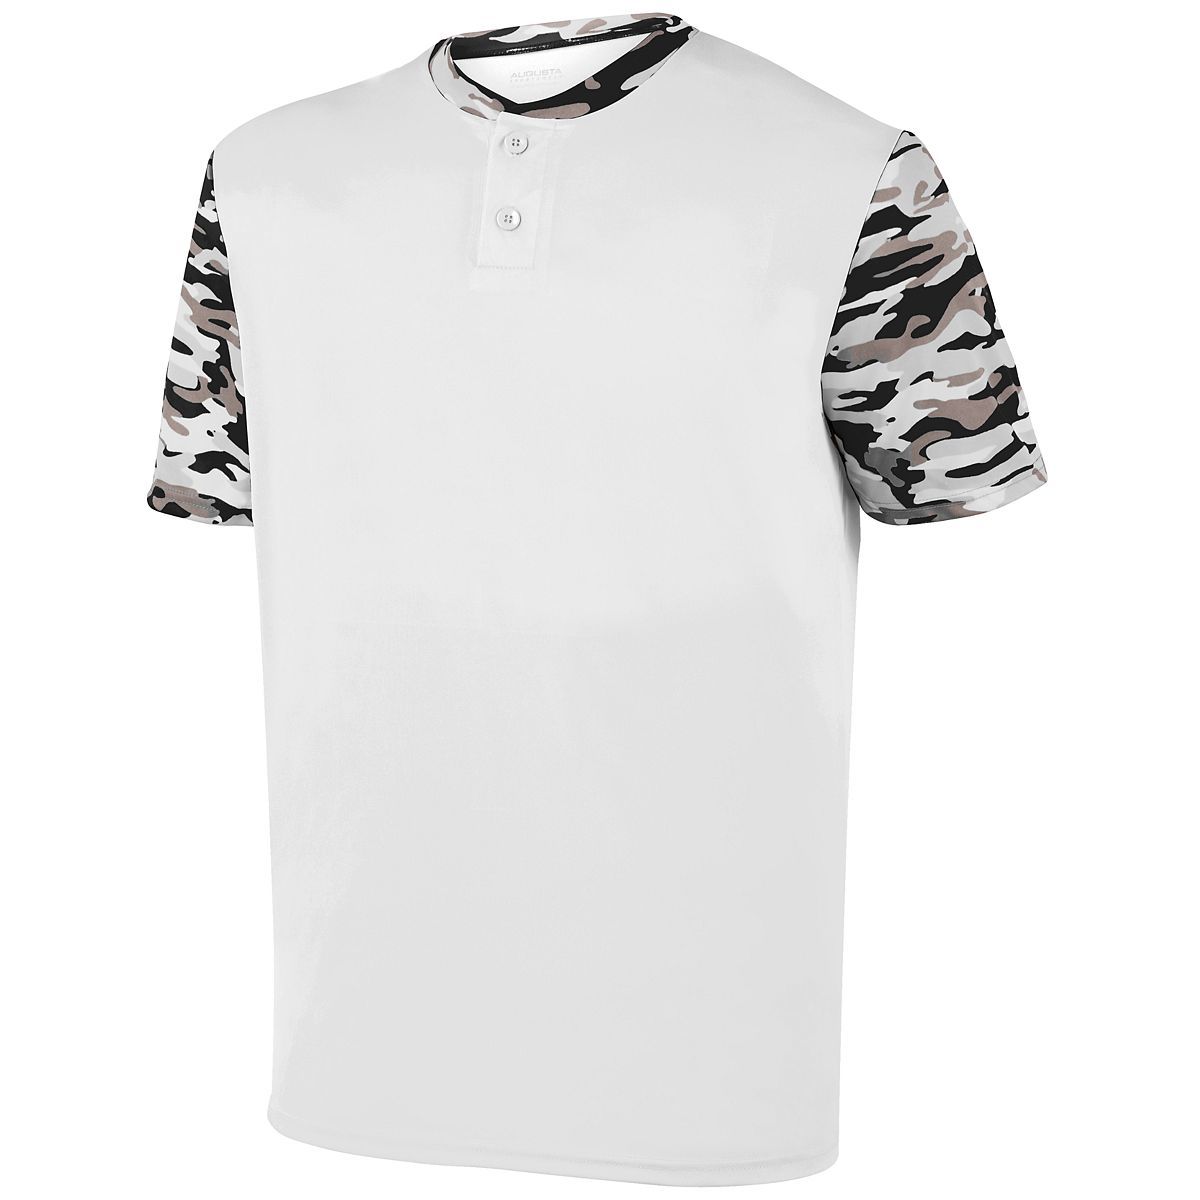 Augusta Sportswear Youth Pop Fly Jersey in White/Black Mod  -Part of the Youth, Youth-Jersey, Augusta-Products, Baseball, Shirts, All-Sports, All-Sports-1 product lines at KanaleyCreations.com